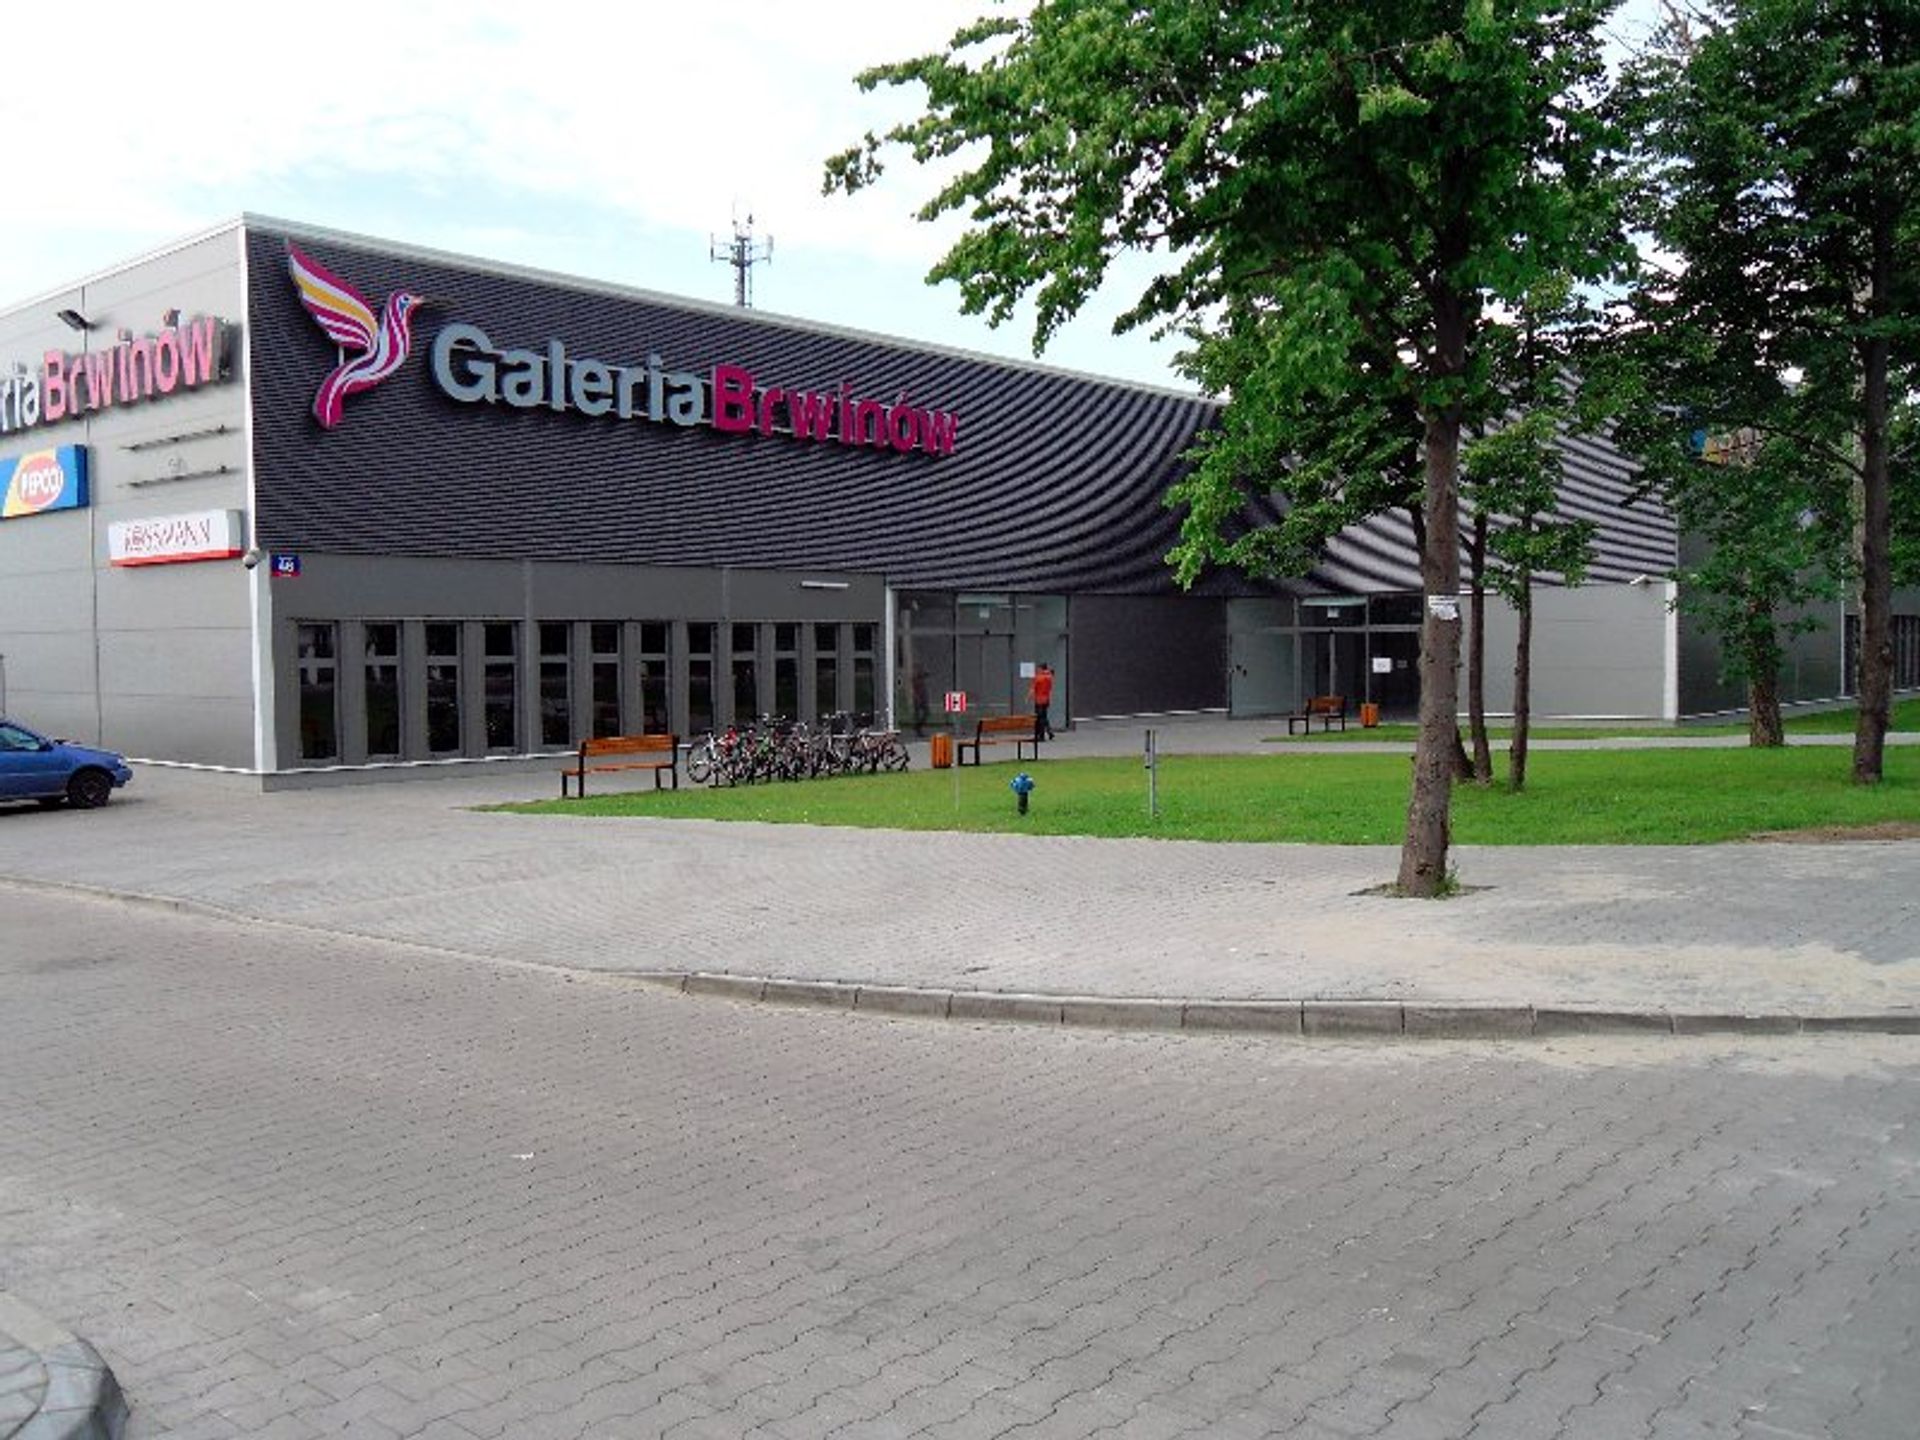  Jeans Factory Outlet w Galerii Brwinów